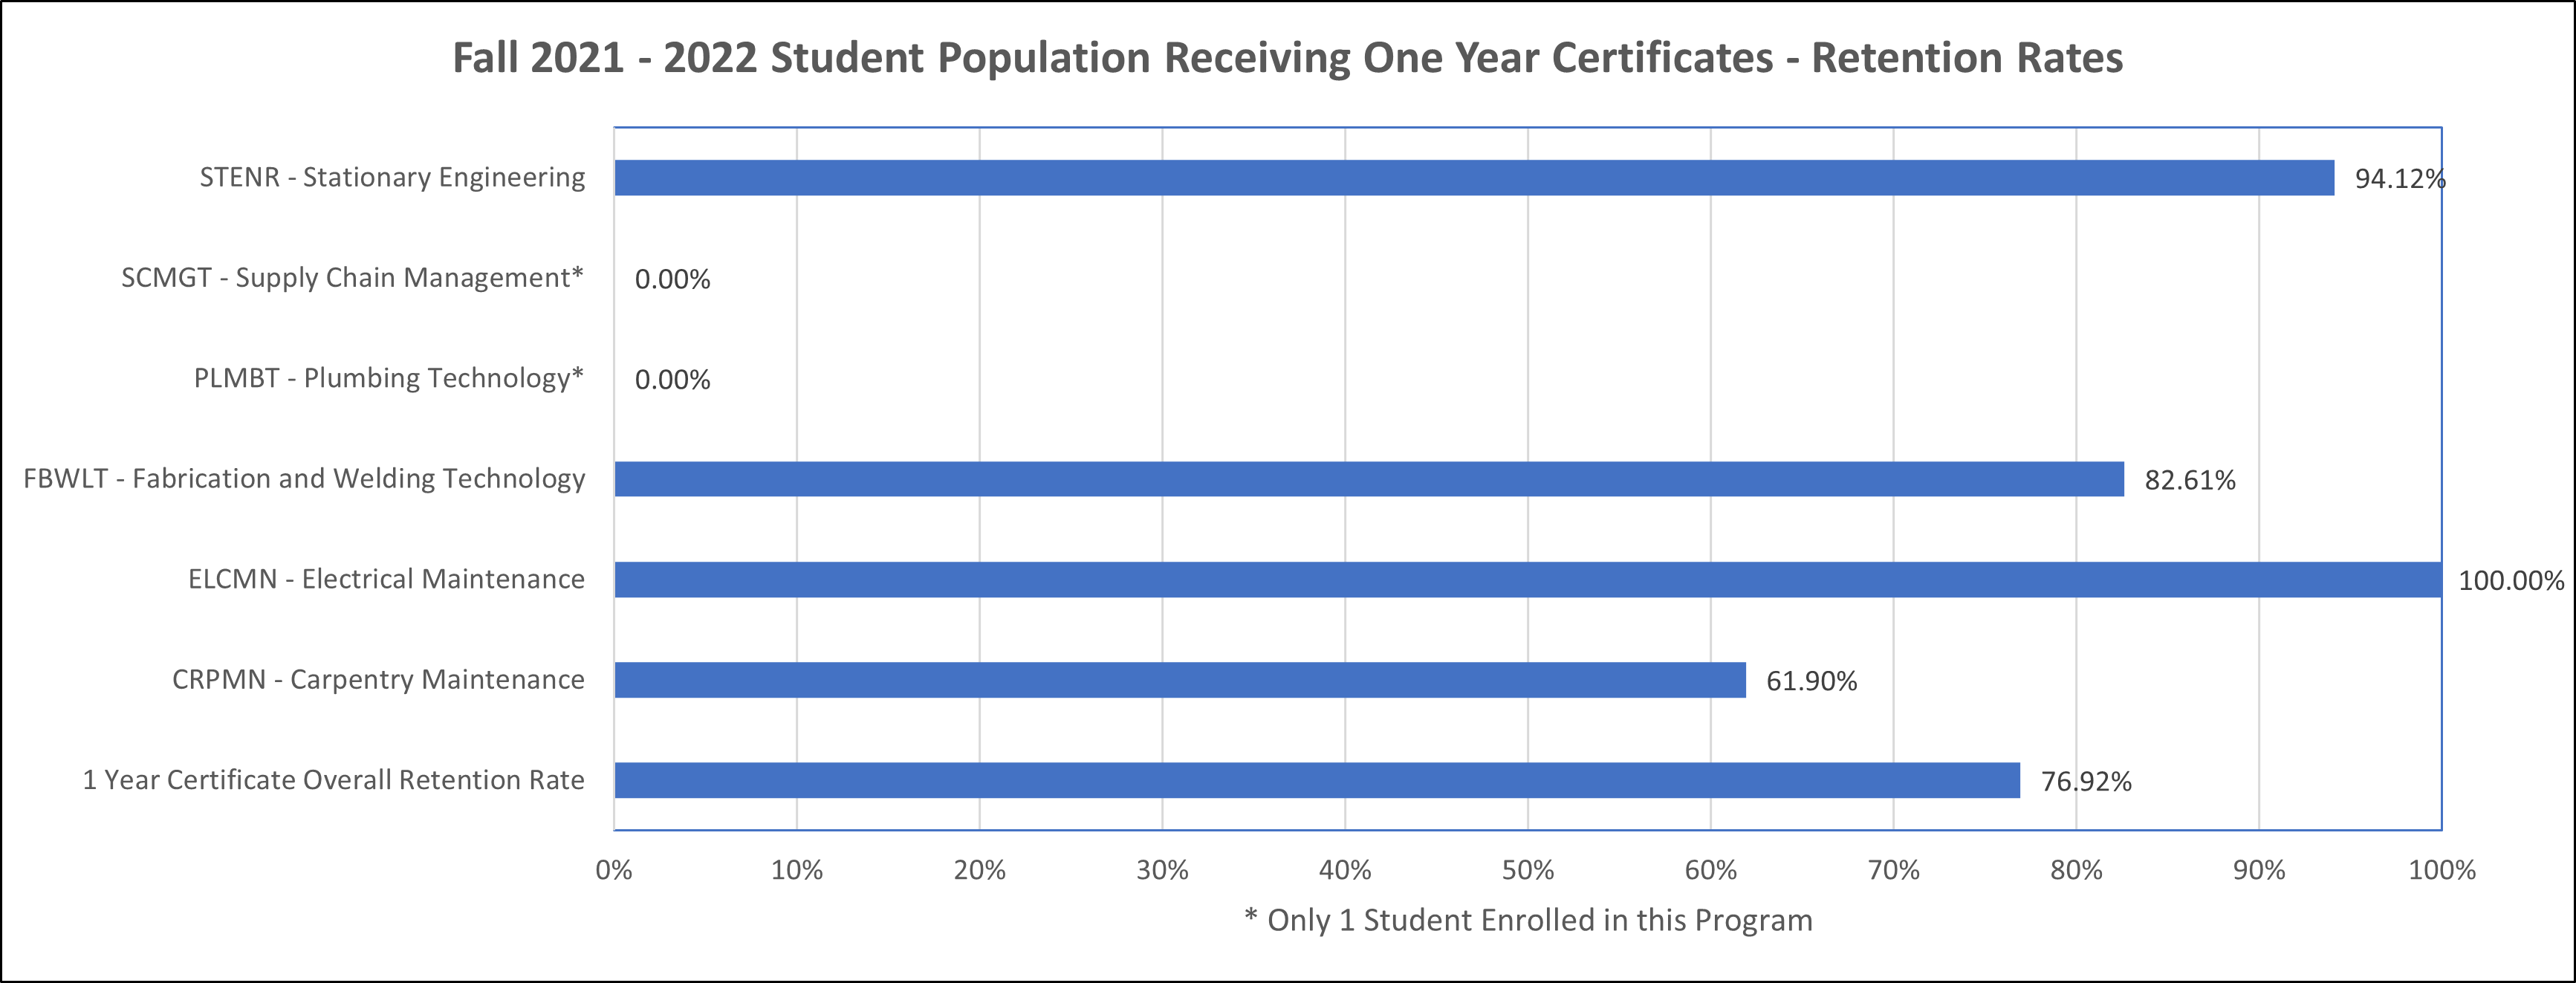 Fall 2021 - 2022 Student Population Receiving One Year Certificates - Retention Rates